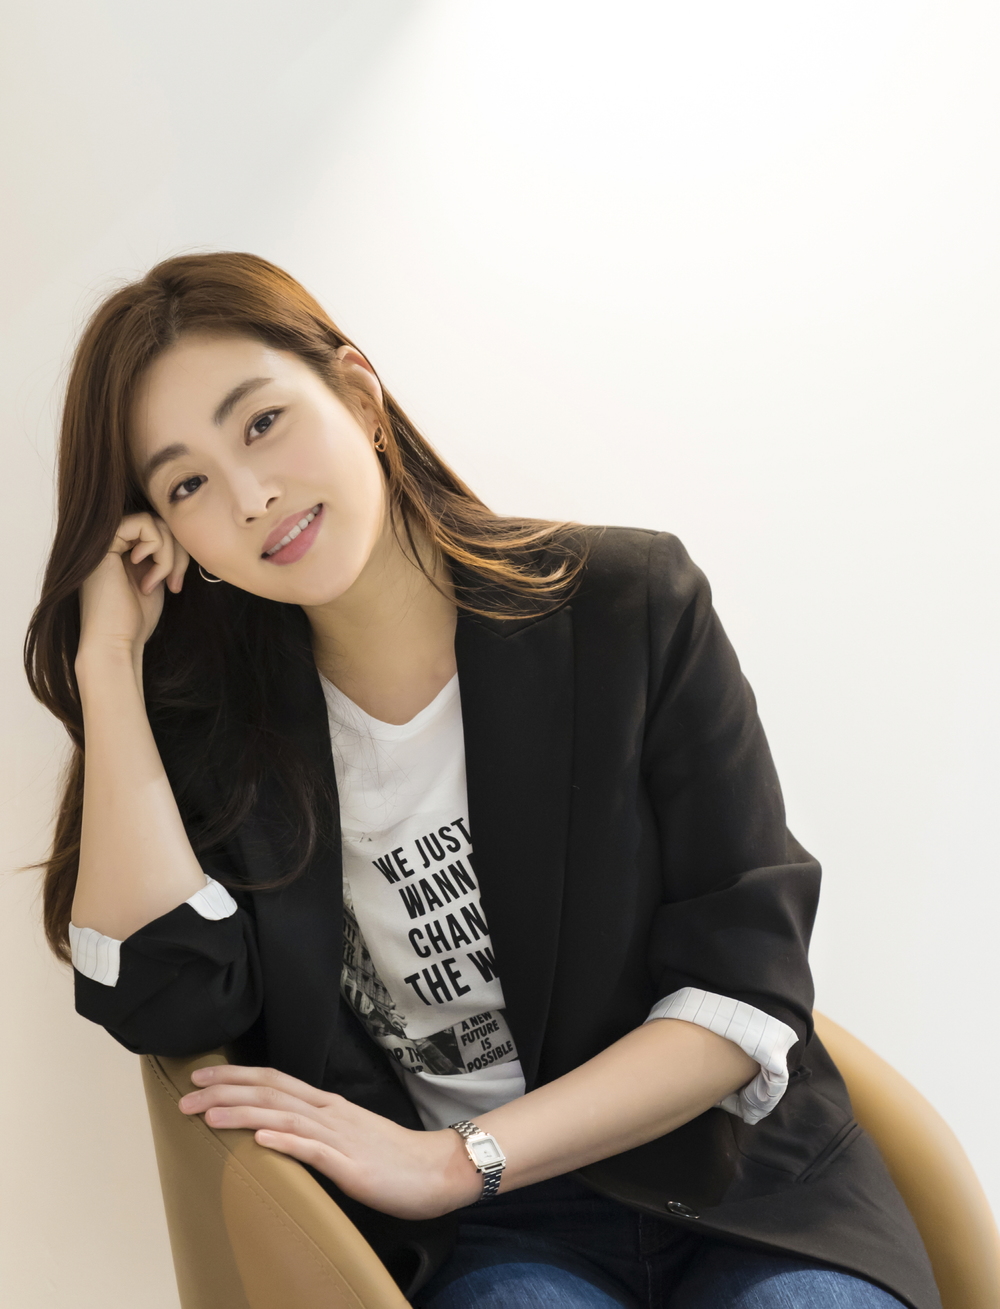 Kang So-ra reveals he wants to appear on fixed entertainmentActor Kang So-ra recently mentioned his image and character in and in Interview.Kang So-ra met screen audiences with her lead film.I dont hurt is a story about the extraordinary mission of the lawyers Tae-soo (An Jae-hong), who was ambitiously appointed as the director of Bronx Zoo Dongsan Park just before the collapse of the original work of the same name by HUN writer, and the employees who worked as animals instead of animals sold.It opened on January 15 and mobilized 1.22 million viewers.Kang So-ra said of the advantages of no harm that ended, Its good and fun, and the balance seems to be hard, but its all there.There are factors that make us look back when we laugh, he said. Our film is a difference that there are not many real animals.It is a movie that wrote the mask of an animal movie. Kang So-ra was divided into a veterinarian Wish and a veterinarian of the remaining garden park without leaving Bronx Zoo just before the collapse in I do not hurt.He also played the lion Acting of the whole body.To this end, Kang So-ra, who wore a suit with a weight of 10kg and played an Acting Tuhon, said, I took it so fun on the spot and it was a good memory and I did not expect this.It is so good to enjoy it personally. Above all, Kang So-ra learned the true taste of comedy through this film. Kang So-ra said, Comedy seems to be not funny if you try to be funny.If you are trying to be funny, you can not do anything. If you try hard, you will be so hard that you will act.So I thought I should be serious about the situation without thinking about comedy. I am serious, but the viewer should be funny.Kang So-ra is also famous for her hairy character, and she has revealed that she has had a small conflict (?) with her agency that she had never had fear of being broken.Kang So-ra, who dreams of free activities, said, I was originally ripped off by the company. I talked to the representative, and now I think I have autonomy.I think he knows that his child is not going to be his way. I think he has eyes that see me like a child. He also appeared on SBS Running Man, an entertainment program for a long time to promote movies.Kang So-ra said: The lesson I learned after my appearance on Running Man is that theres not one person to believe: it seemed like watching the cast was a celebrity.I saw Yoo Jae-sun and said, Its a miscarriage. Kang So-ra said, I was happy. Im looking for me.I am motivated to go out again, so I run for the game. I run only for the game, so I think I will be on the air only desperately. Kang So-ra said, The company was worried about going out regularly.If I relex rather than damage the image, Ill use a lot of slander terms and Ill be so endlessly broken.When I first went to live radio, I did a lot of things. I liked writers, but the faces of the company were bad.I want to try a radio DJ now. I have a good time to go home. bak-beauty